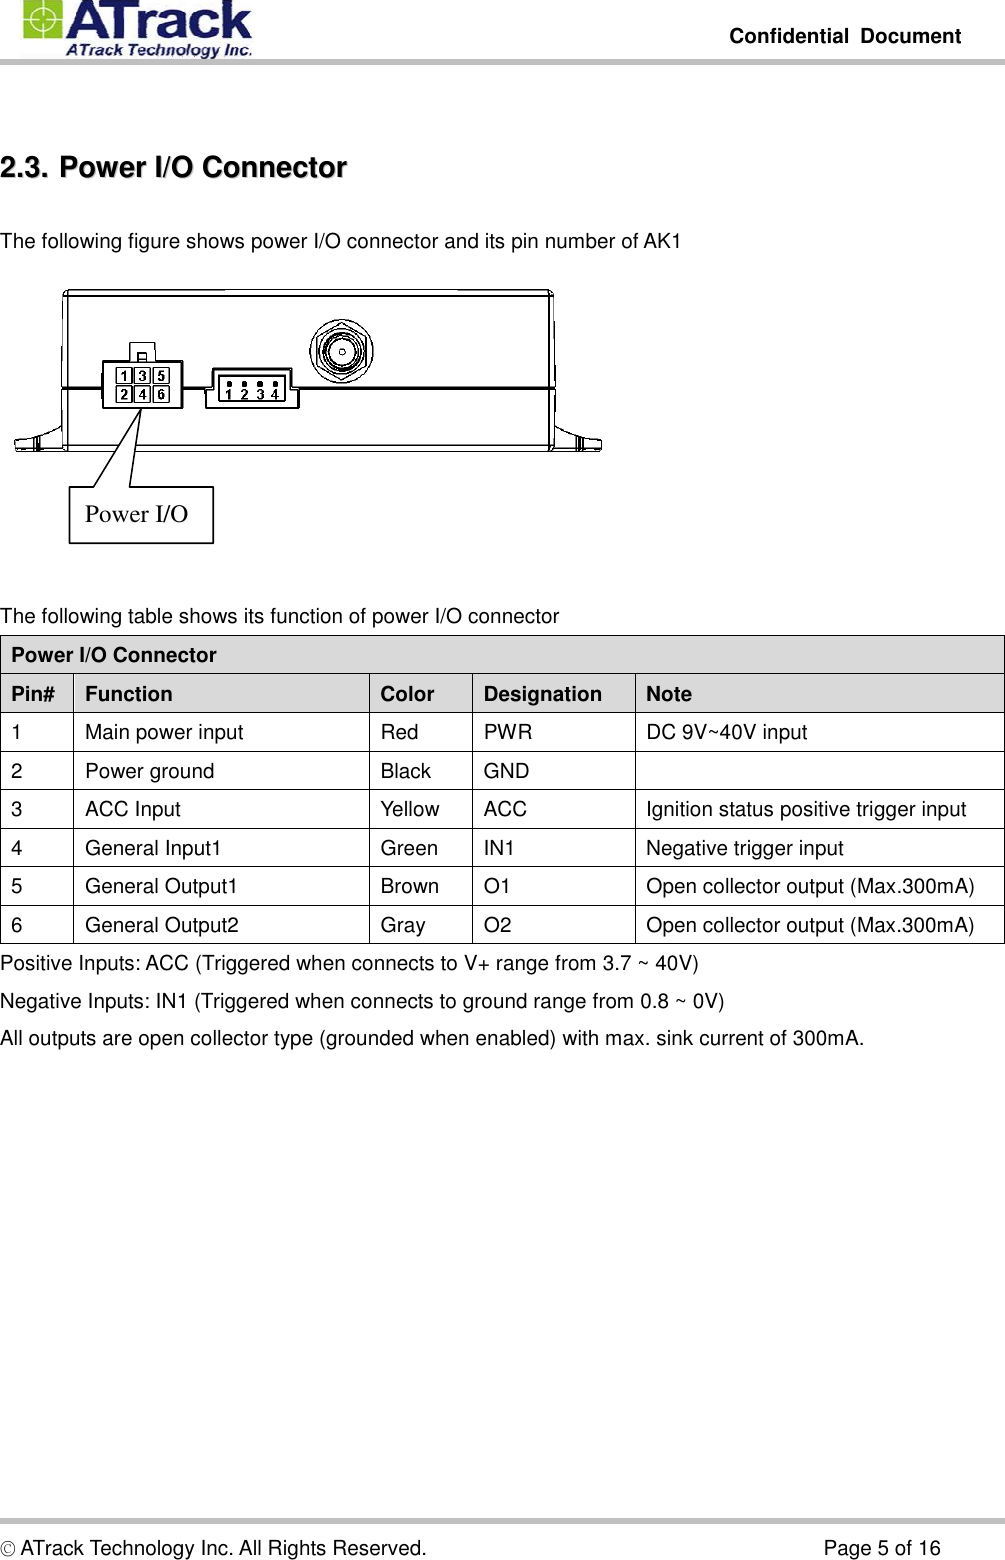         Confidential  Document  © ATrack Technology Inc. All Rights Reserved.                                                                            Page 5 of 16  22..33..  PPoowweerr  II//OO  CCoonnnneeccttoorr  The following figure shows power I/O connector and its pin number of AK1     The following table shows its function of power I/O connector Power I/O Connector Pin# Function  Color  Designation  Note 1  Main power input  Red  PWR  DC 9V~40V input 2  Power ground  Black  GND   3  ACC Input  Yellow  ACC  Ignition status positive trigger input 4  General Input1  Green  IN1  Negative trigger input 5  General Output1  Brown  O1  Open collector output (Max.300mA) 6  General Output2  Gray  O2  Open collector output (Max.300mA) Positive Inputs: ACC (Triggered when connects to V+ range from 3.7 ~ 40V) Negative Inputs: IN1 (Triggered when connects to ground range from 0.8 ~ 0V) All outputs are open collector type (grounded when enabled) with max. sink current of 300mA. Power I/O 